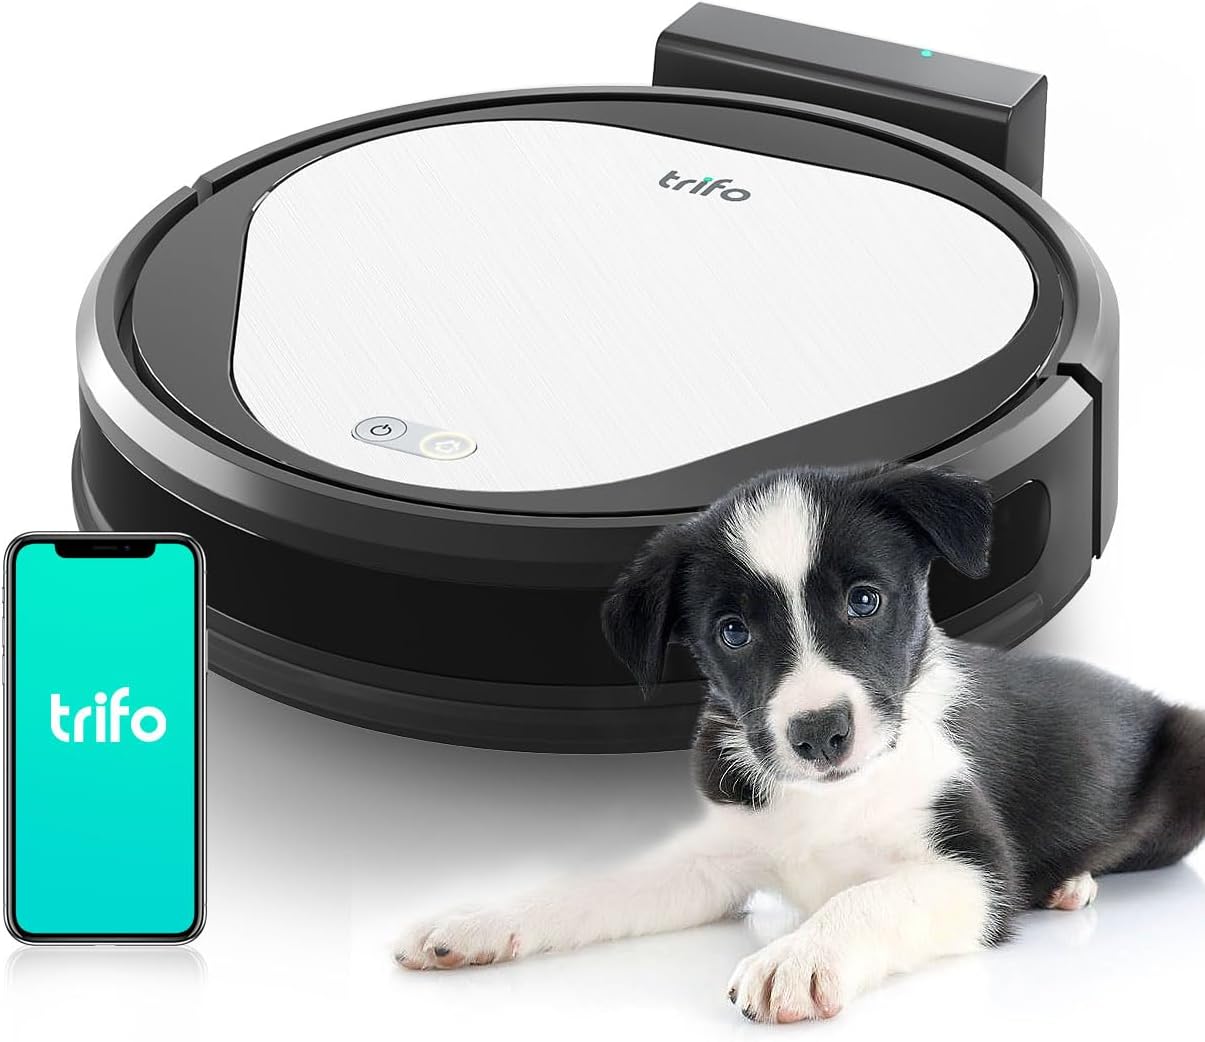 Trifo Emma Review: The Powerful and Smart Robot Vacuum Cleaner